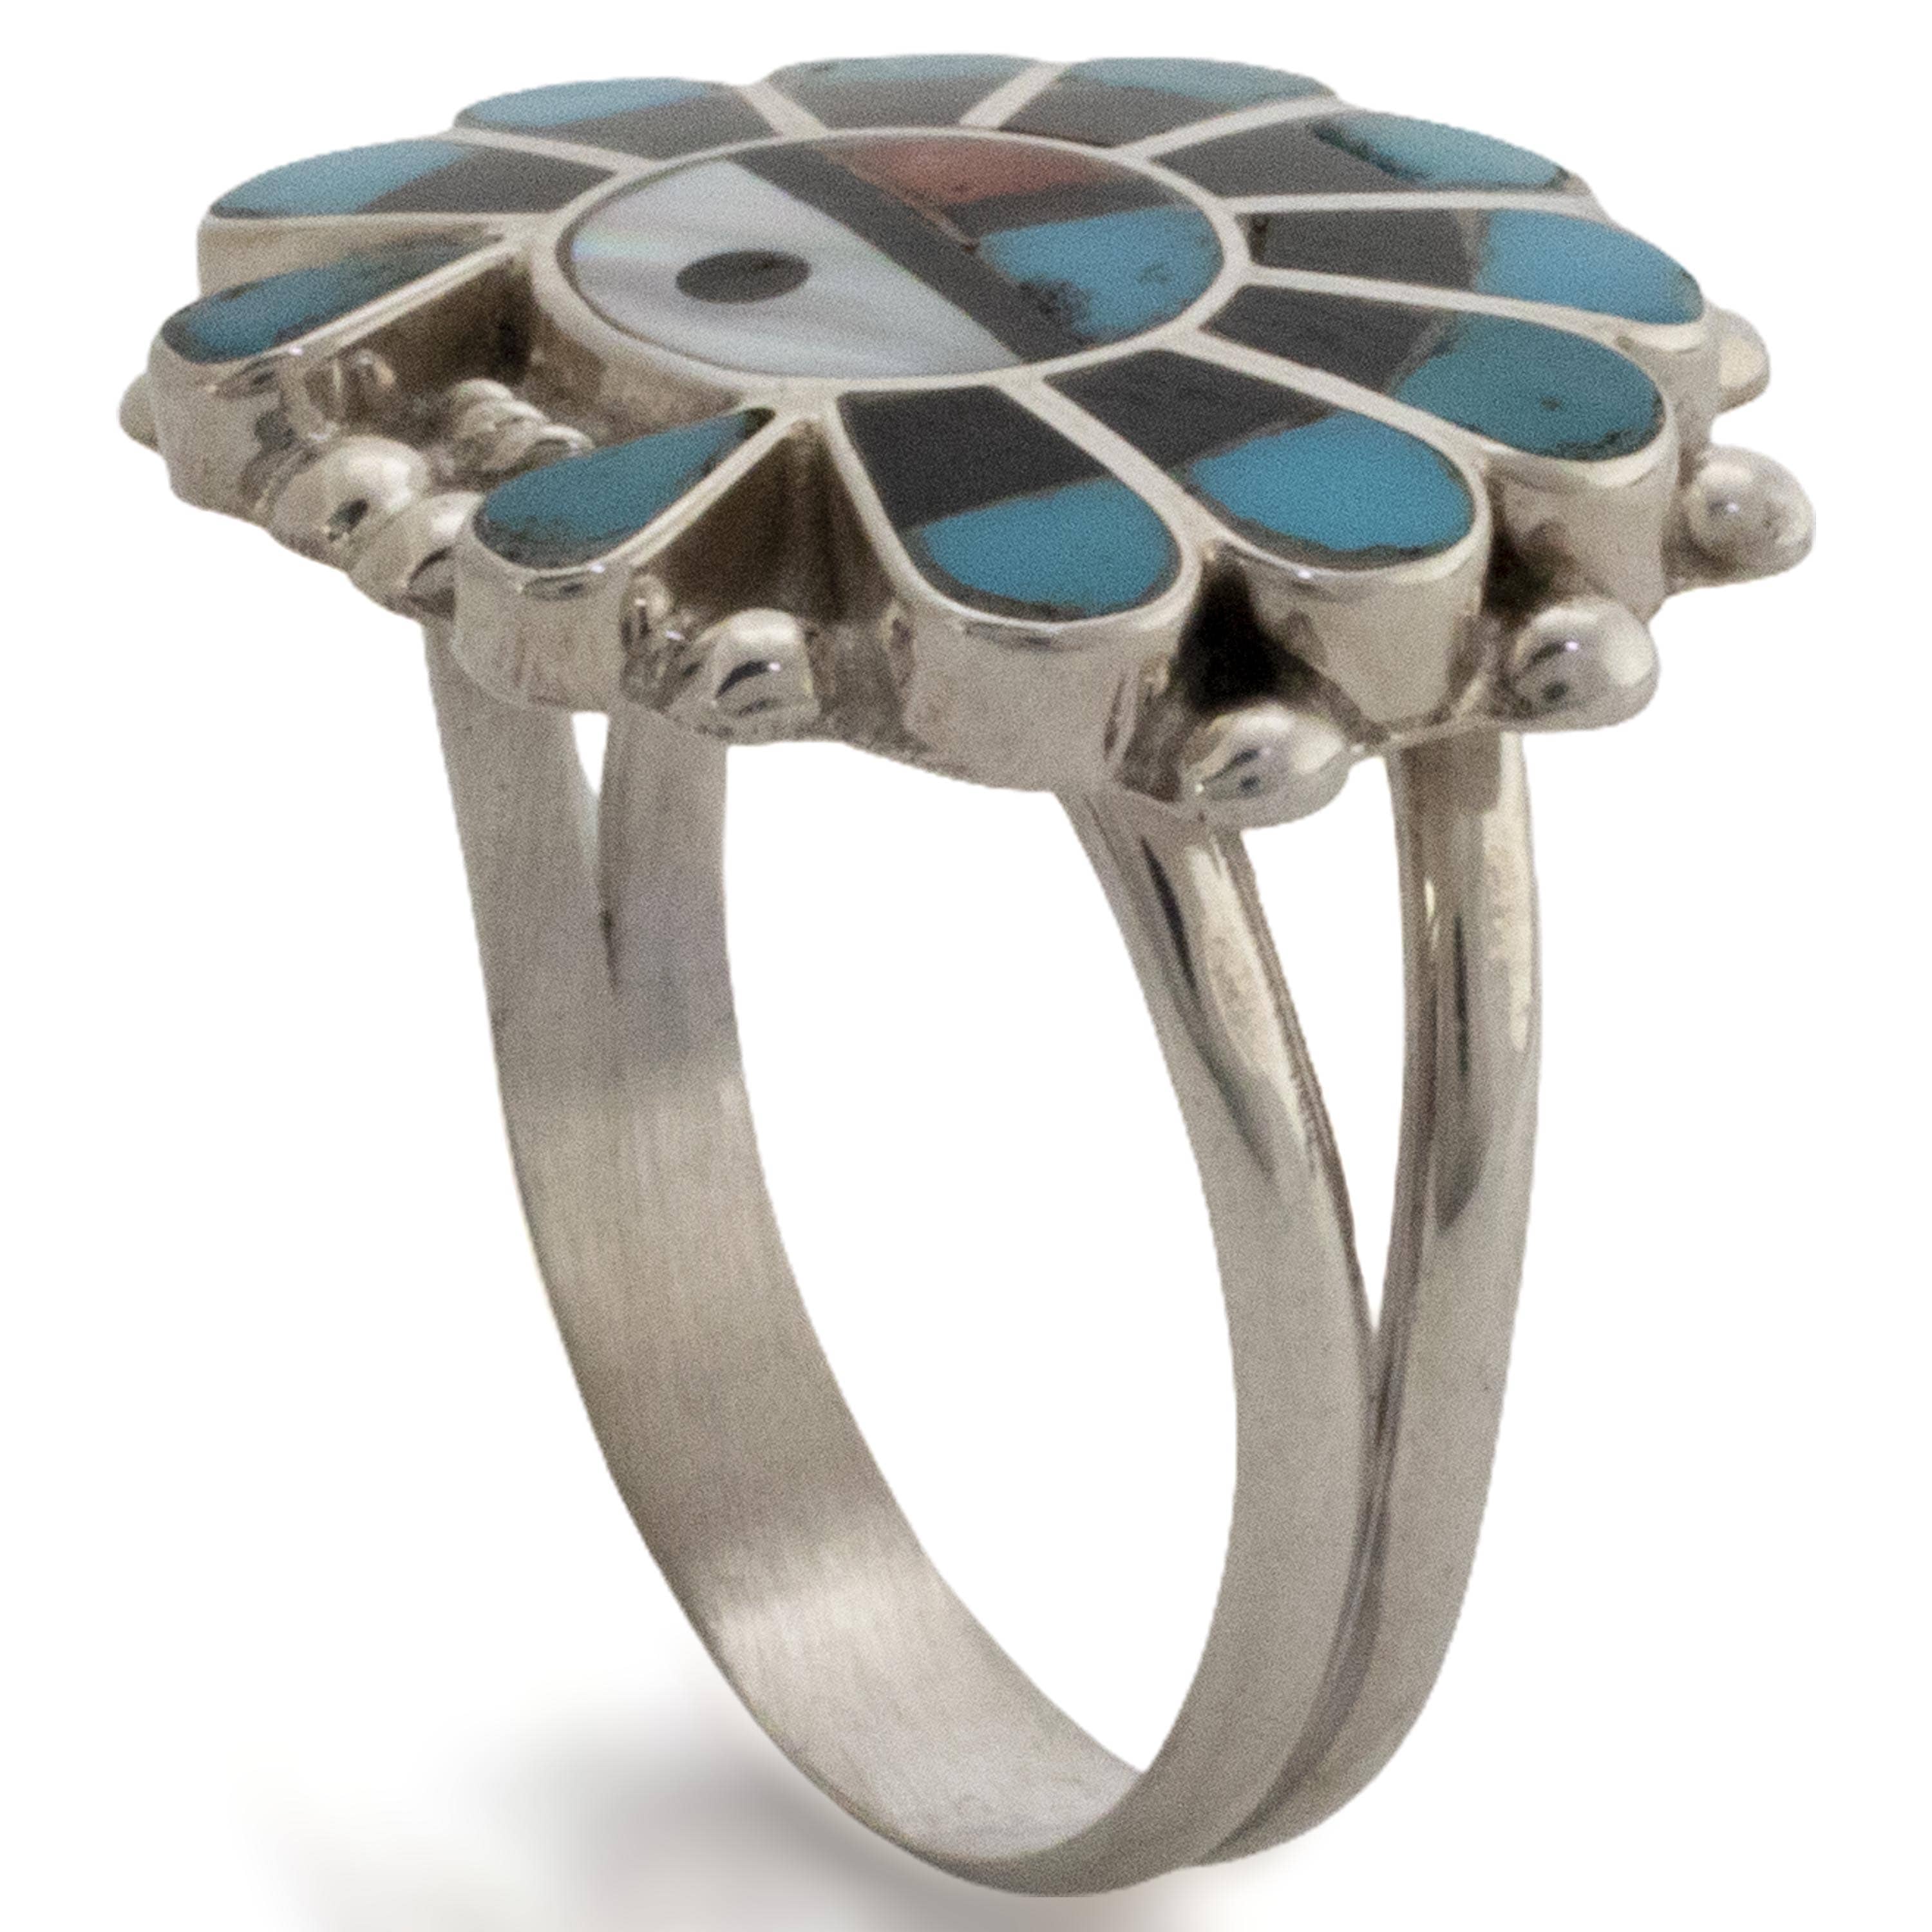 Kalifano Native American Jewelry E.R. Zuni Sunface Turquoise, Mother of Pearl, Jet, and Coral USA Native American Made 925 Sterling Silver Ring